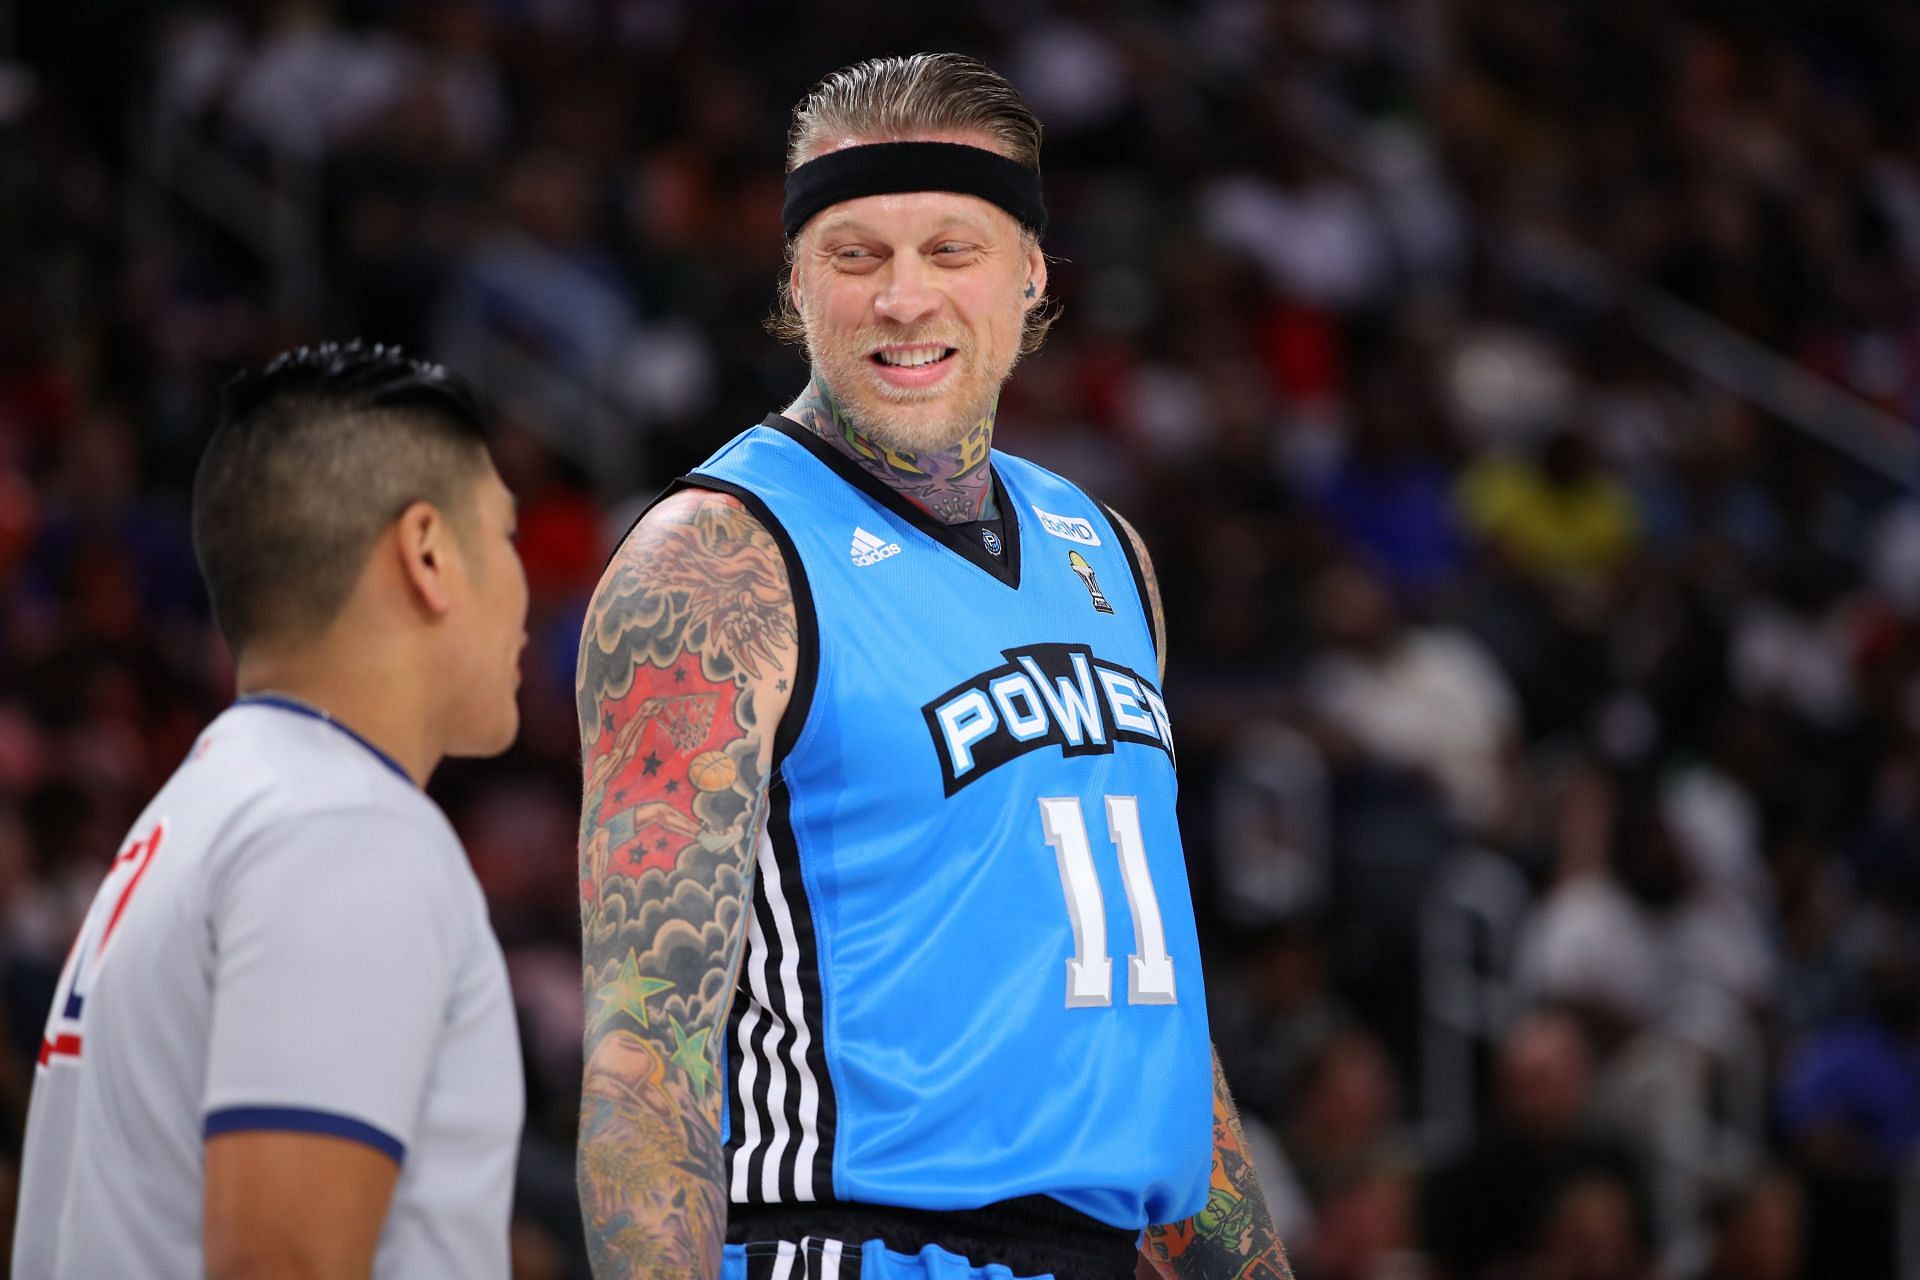 Chris Andersen playing for Power in the BIG3.